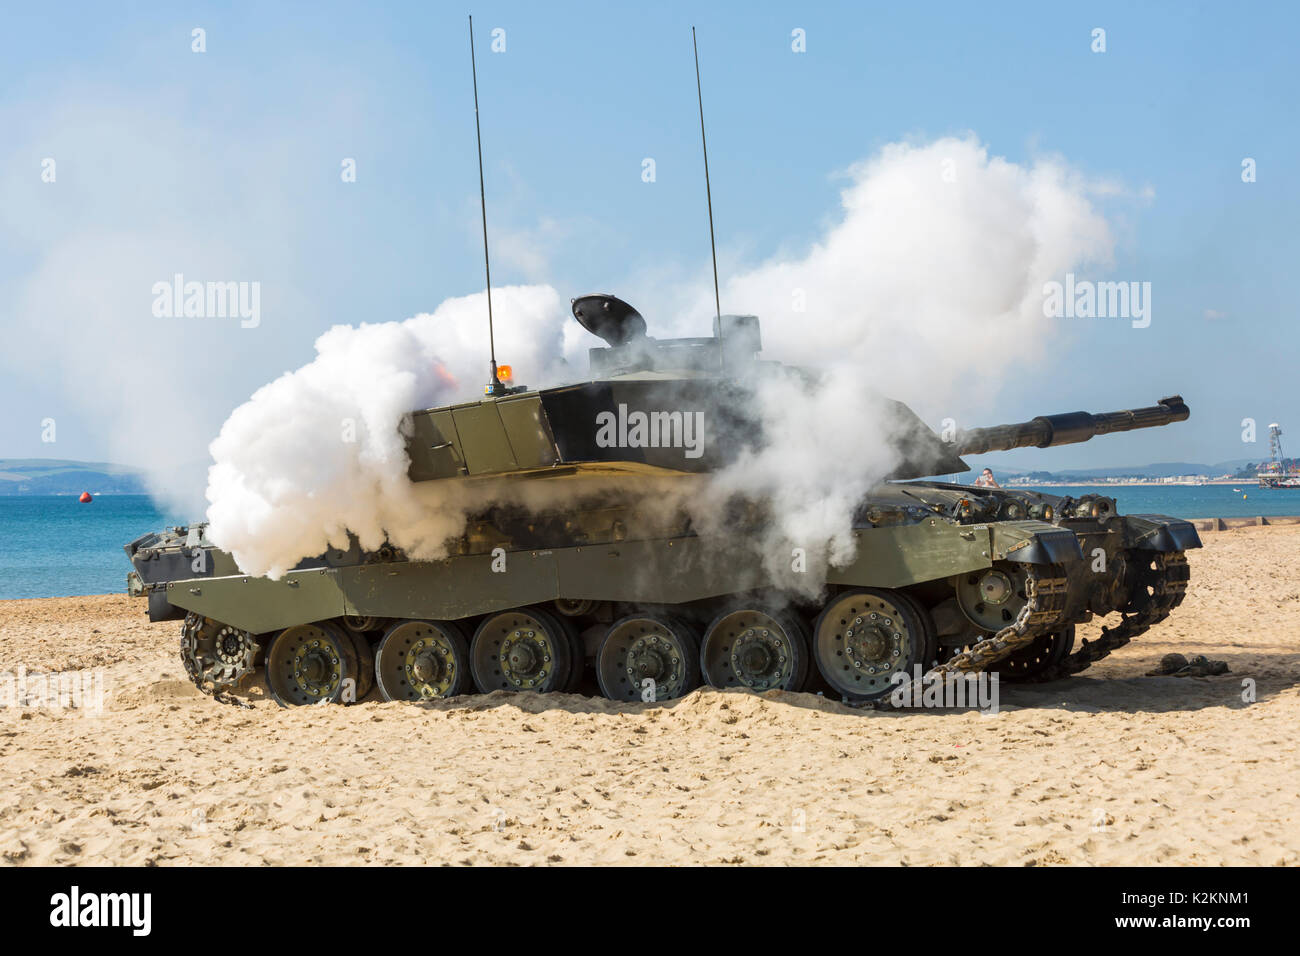 Bournemouth, UK. 1st Sept 2017. The second day of the tenth anniversary of the Bournemouth Air Festival. The Army entertain the crowds with their armoured vehicle display - smoke billowing around chieftain tank. Credit: Carolyn Jenkins/Alamy Live News Stock Photo